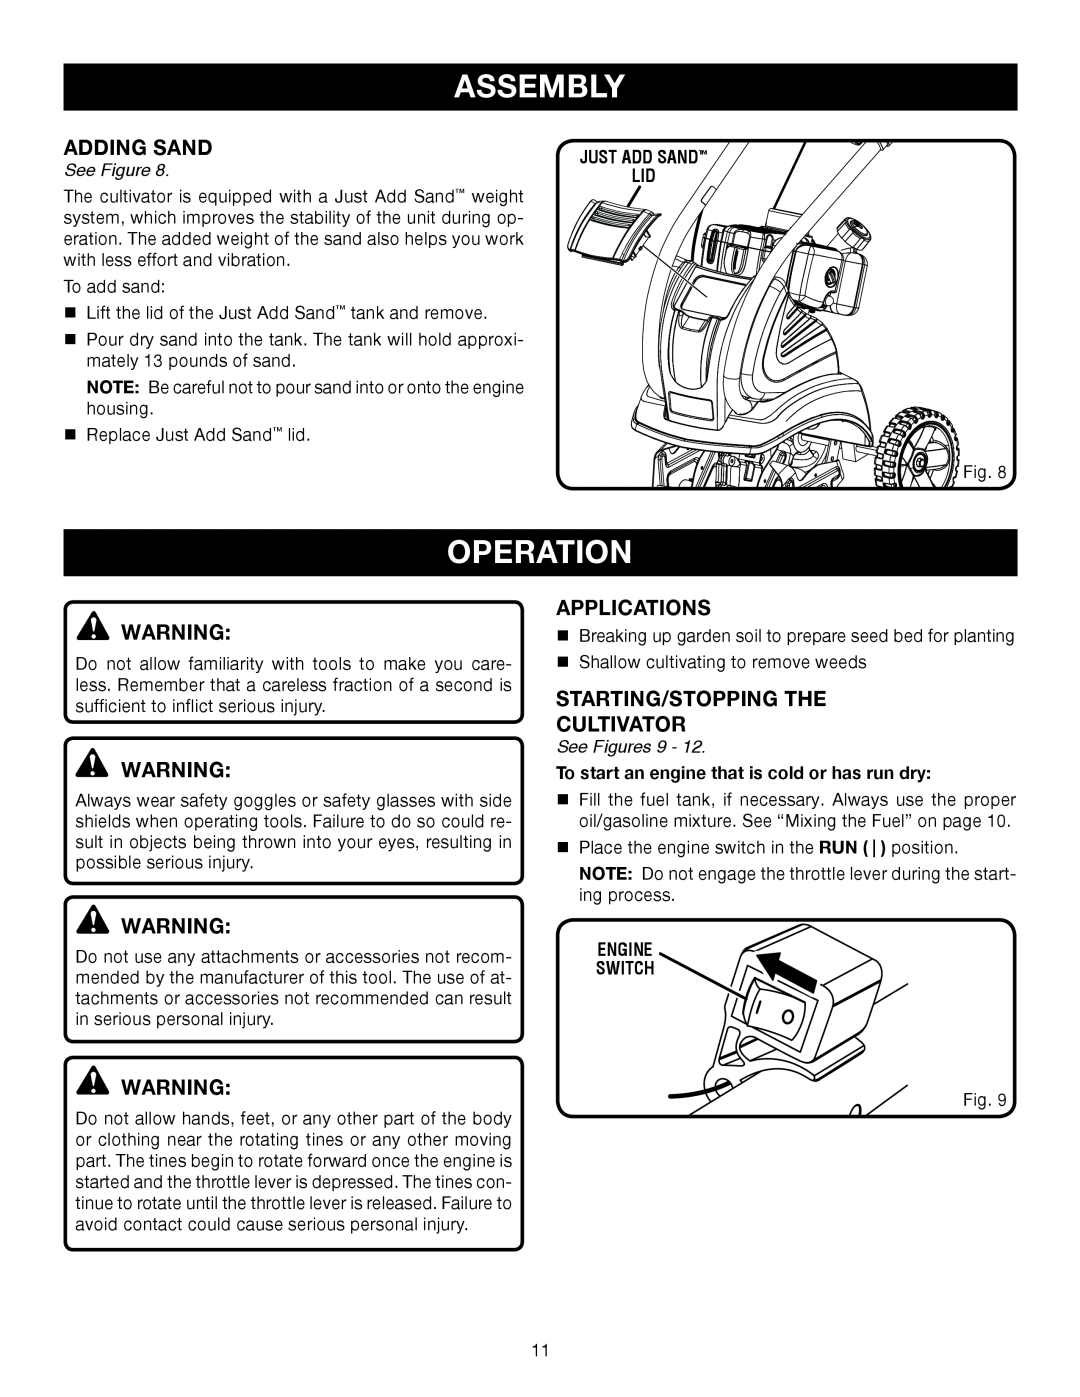 Ryobi Outdoor RY60511A manual Operation, Adding Sand, Applications, Starting/Stopping The Cultivator, Assembly, See Figure 